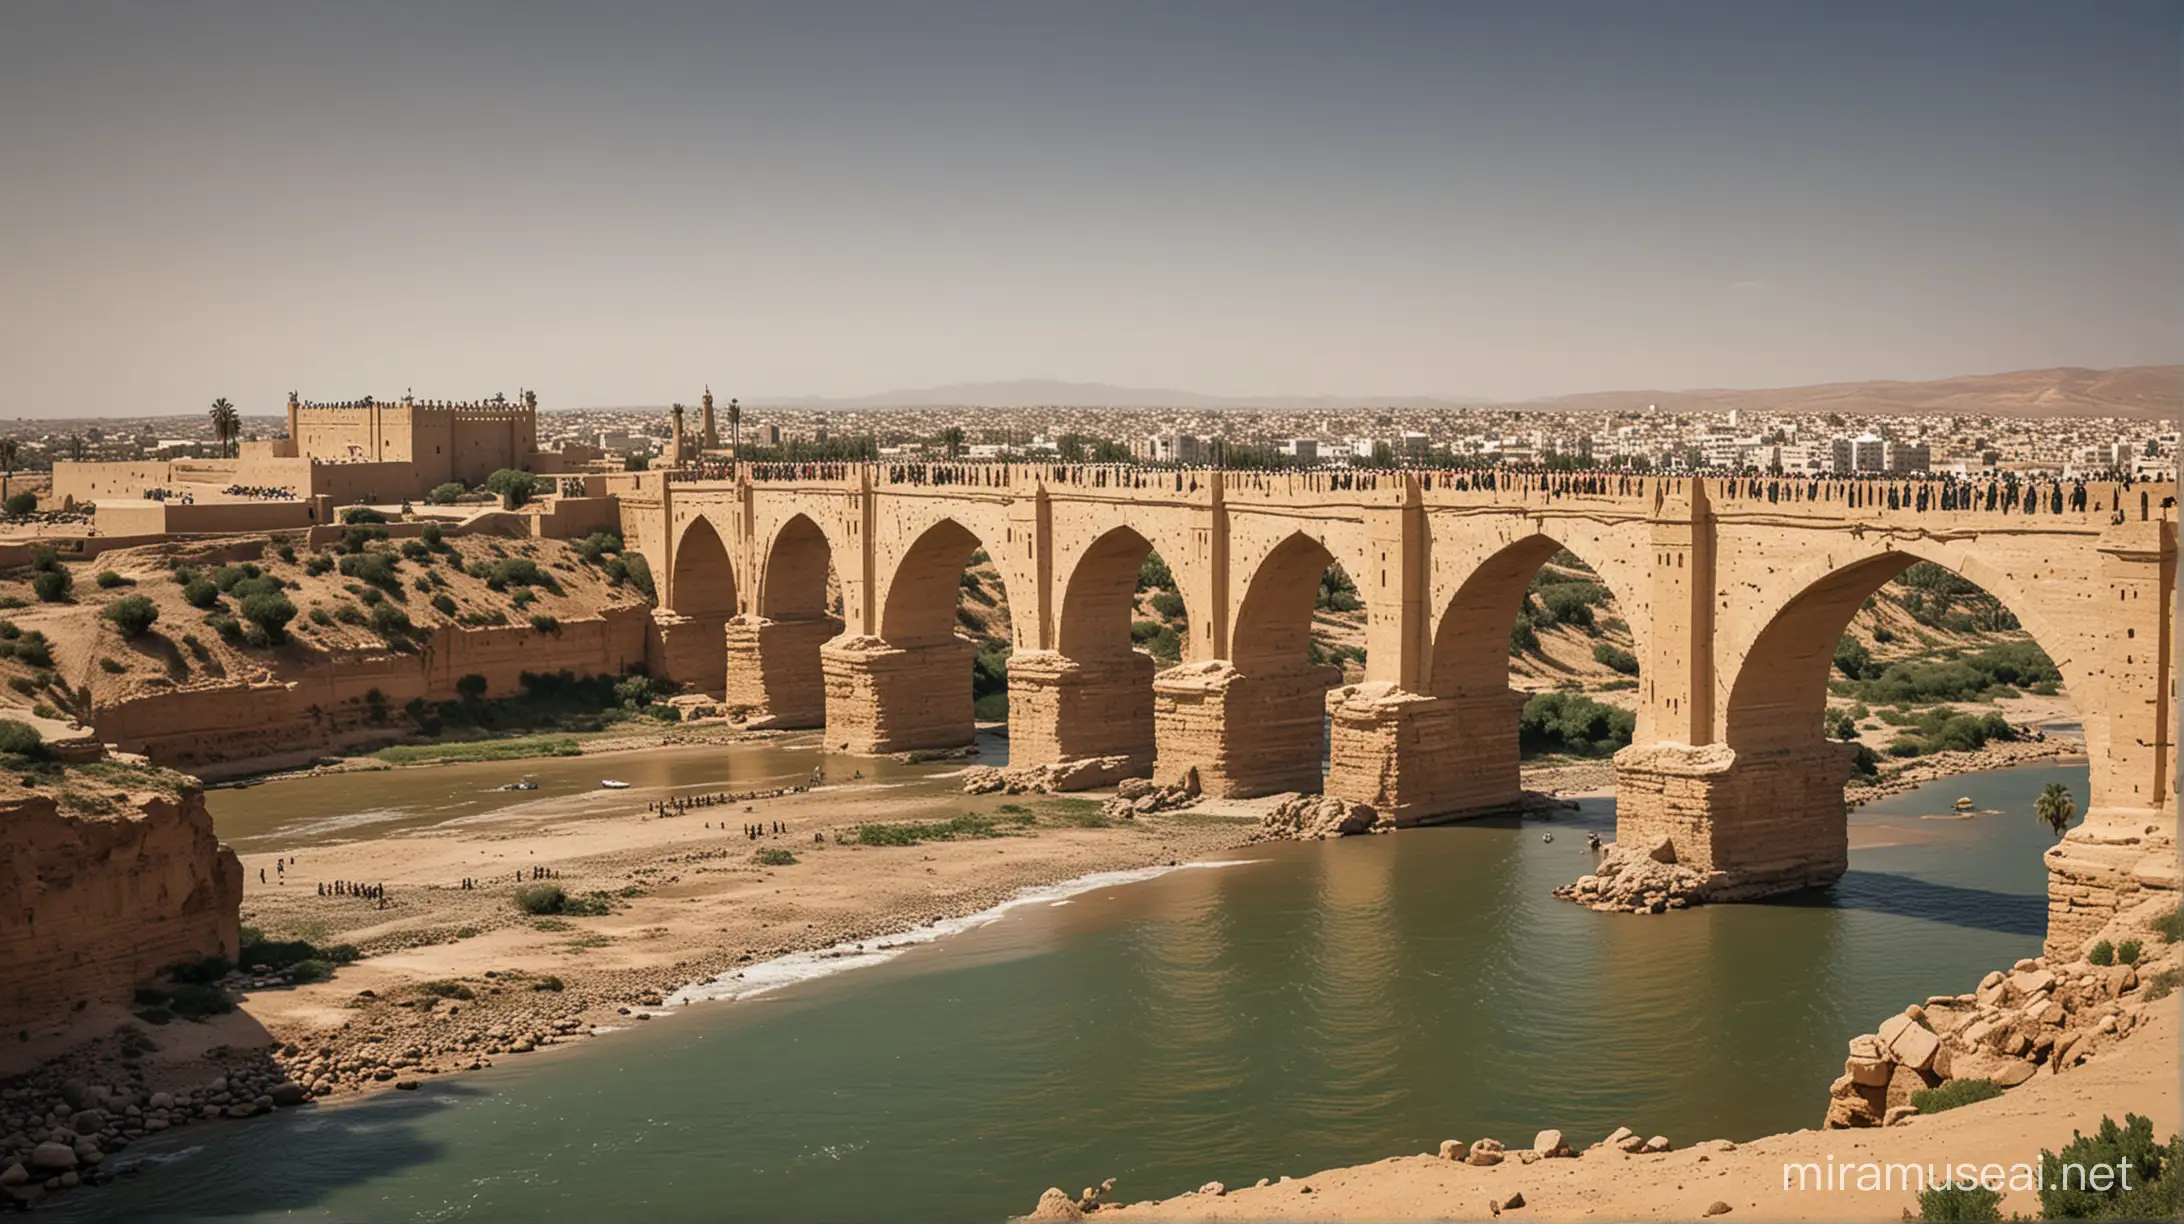 Create an image depicting the Qantara of Oued El Makhzen in Morocco during the sixteenth century, focusing on its strategic importance in connection with the Battle of Oued El Makhzen or the Battle of the Three Kings, which occurred on August 4, 1578. Show the bridge as a crucial point in the battle, with Portuguese forces attempting to escape across it but finding it destroyed, leading to chaos and drowning in the river. Highlight the decisive victory of the Moroccan army and the significance of this battle as a turning point in the history of Morocco and Portugal. Capture the atmosphere of the battlefield, the river, and the historical context of the event to convey the intensity and impact of this pivotal moment.